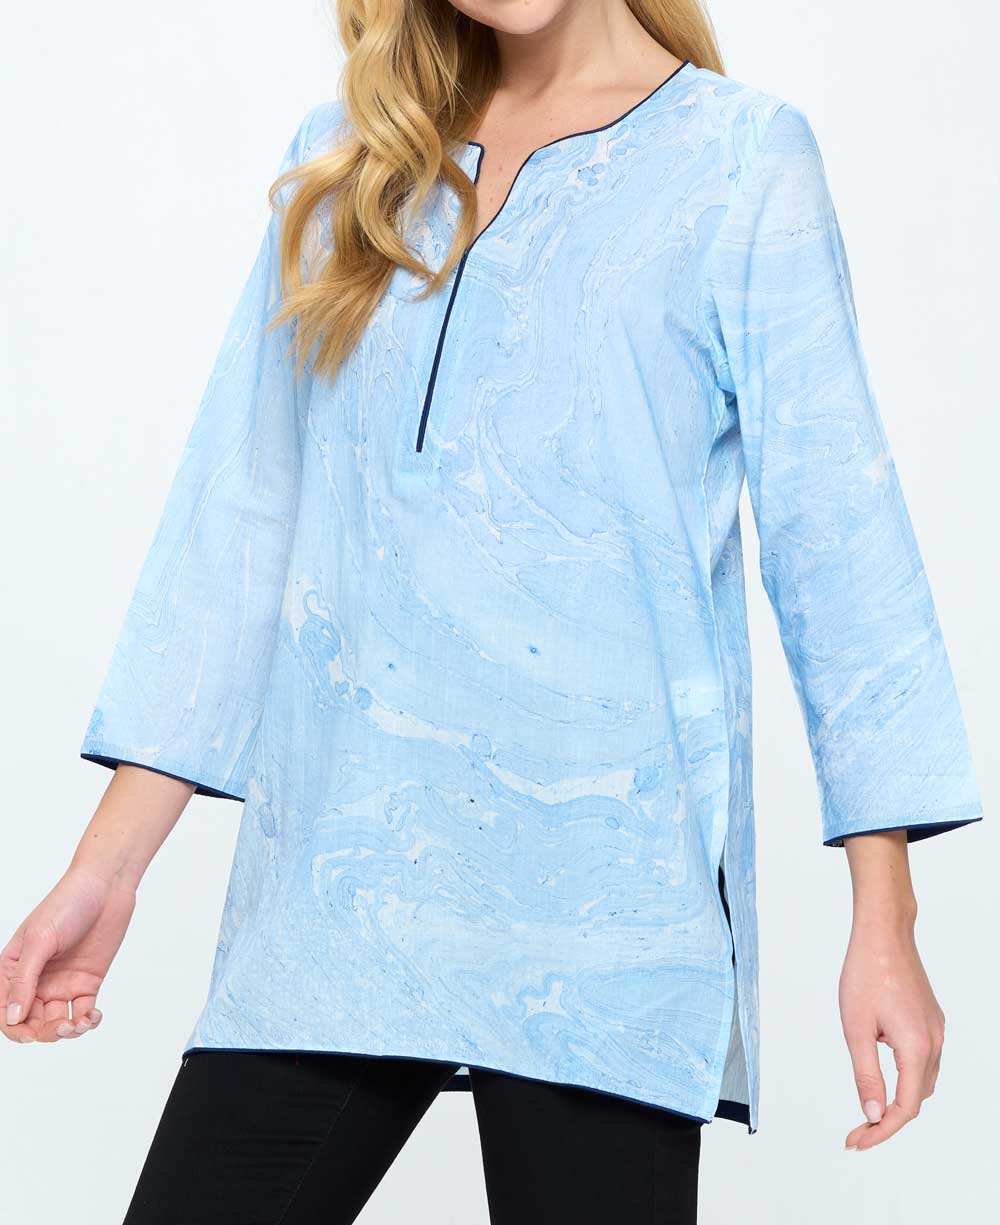 Hand Tie and Dye Blue Marble Print Soft Cotton Tunic Top - Shirts & Tops S